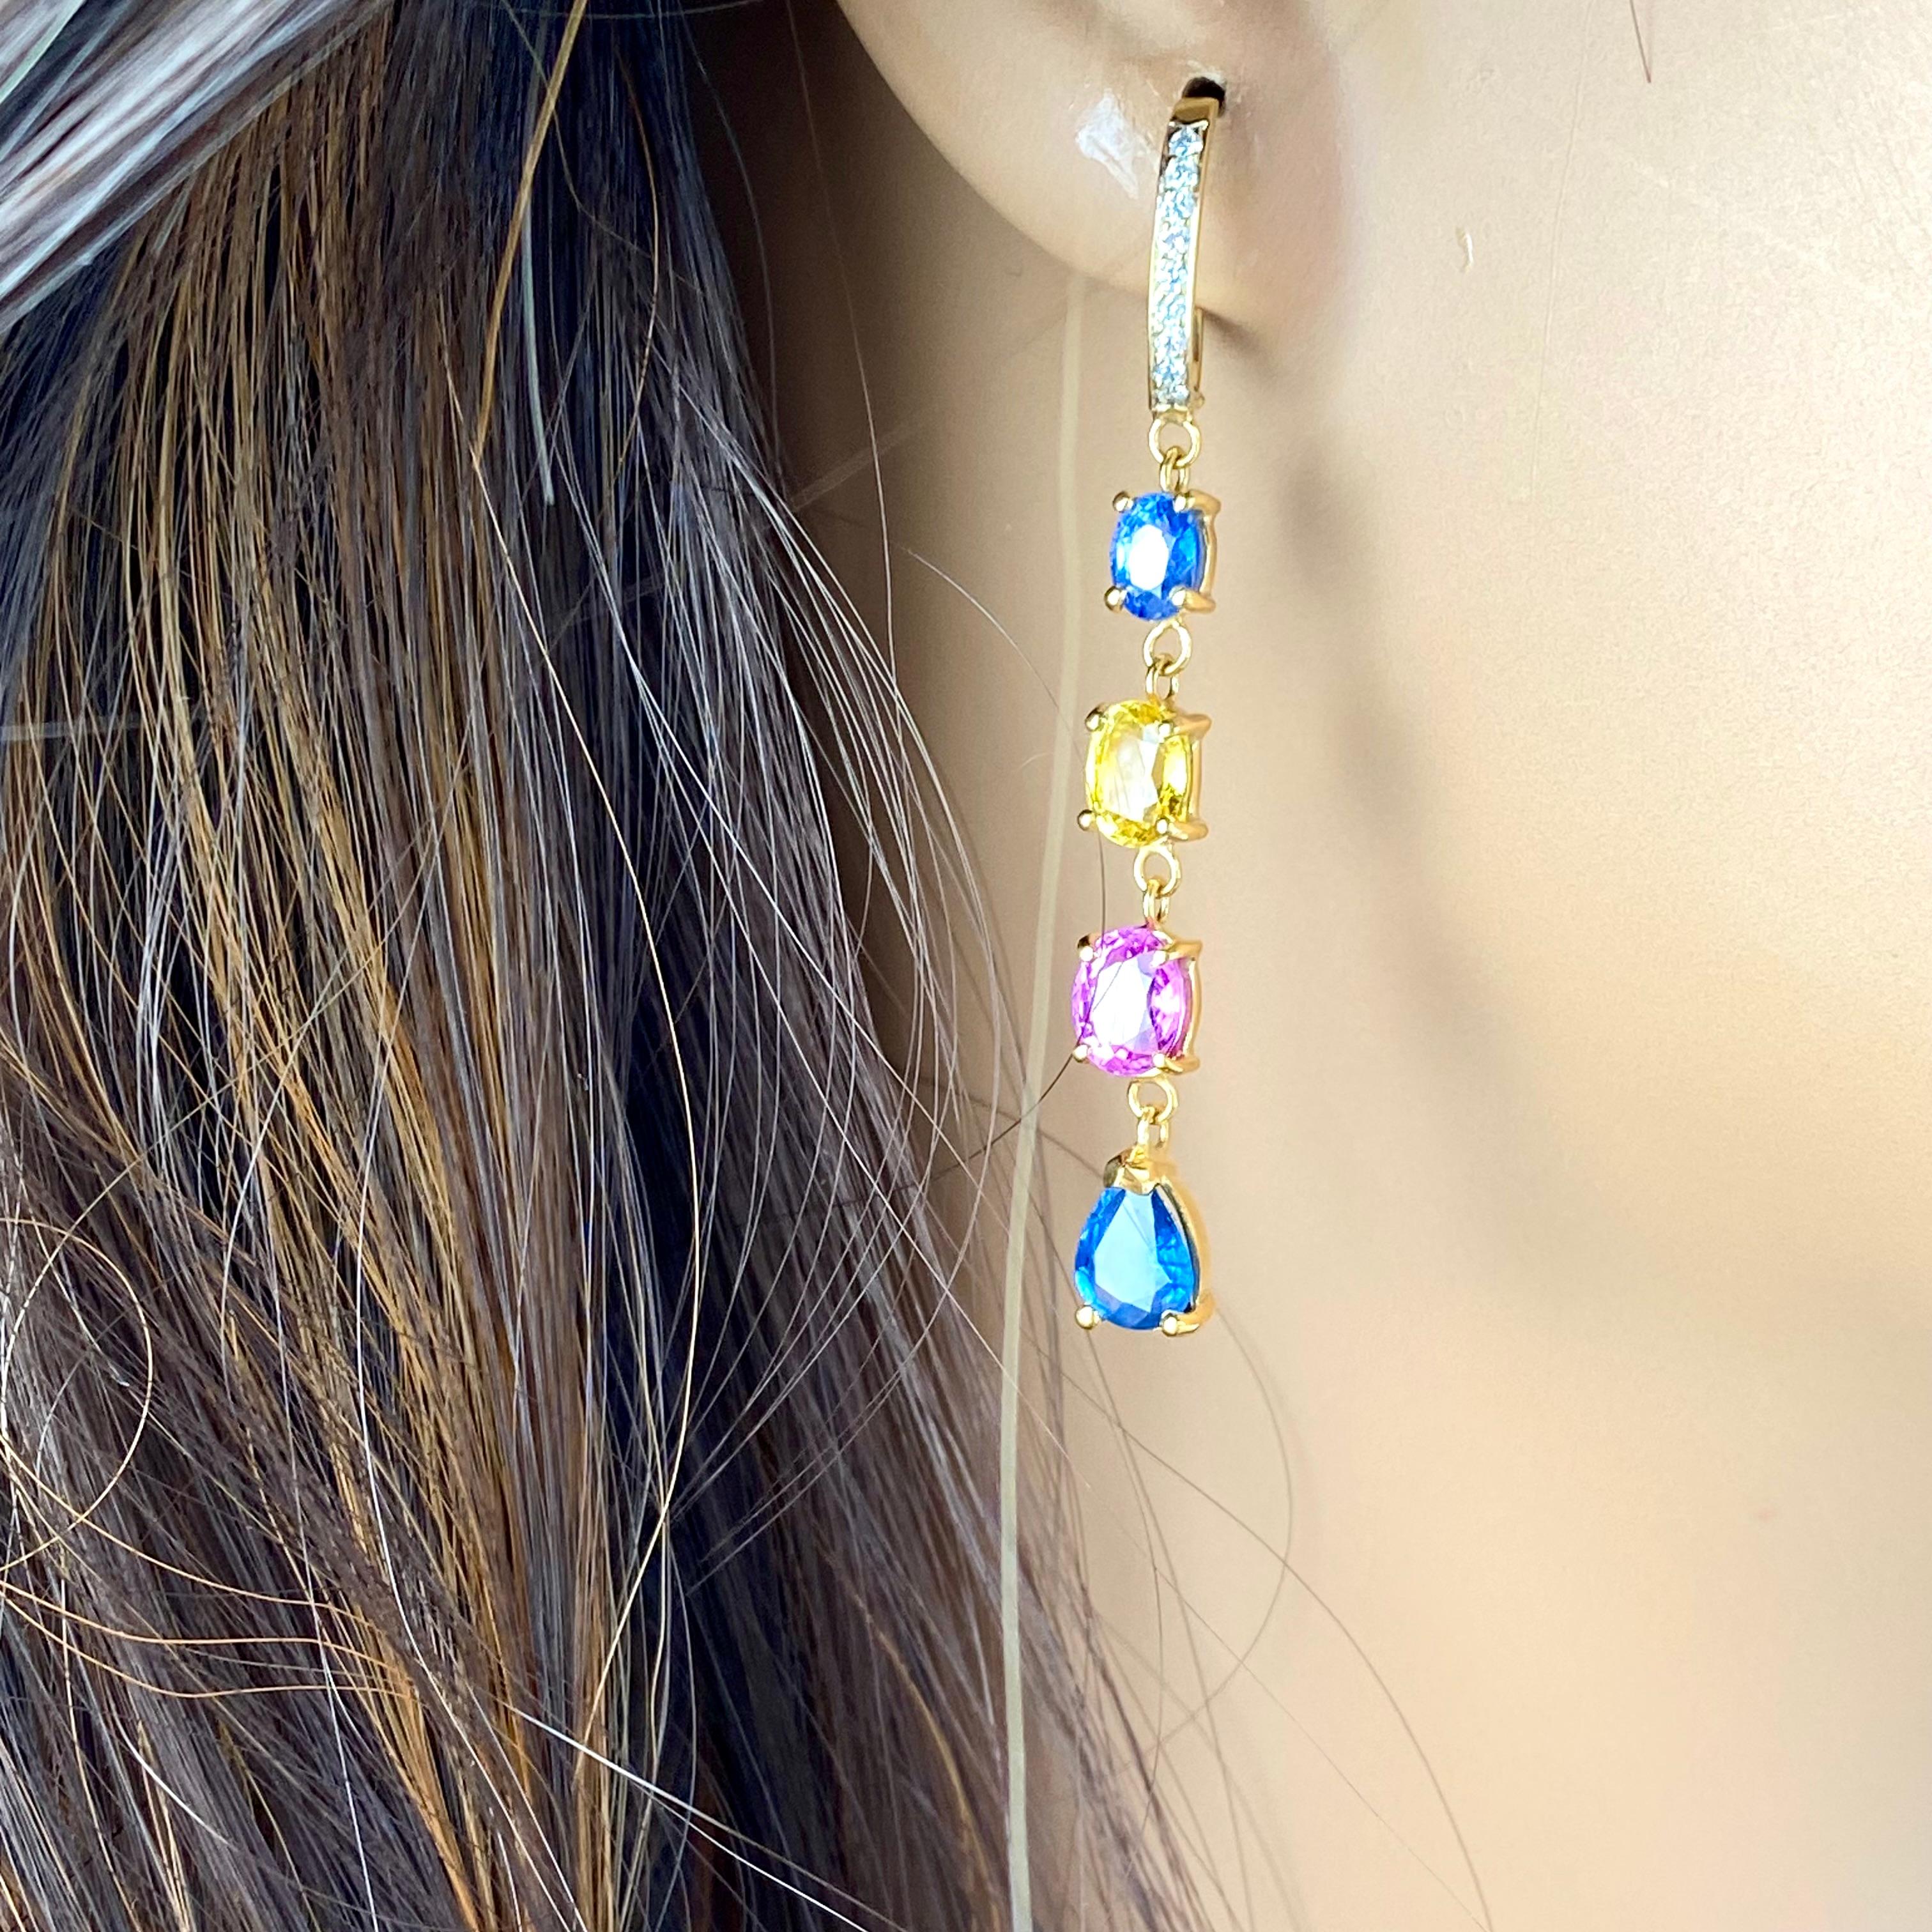 Introducing our stunning 14 Karat Yellow Gold Multi-Colored Gemstone and Diamond Hoop Earrings, designed to captivate with their exquisite beauty and vibrant hues. These breathtaking earrings feature a delicate hoop design crafted from luxurious 14